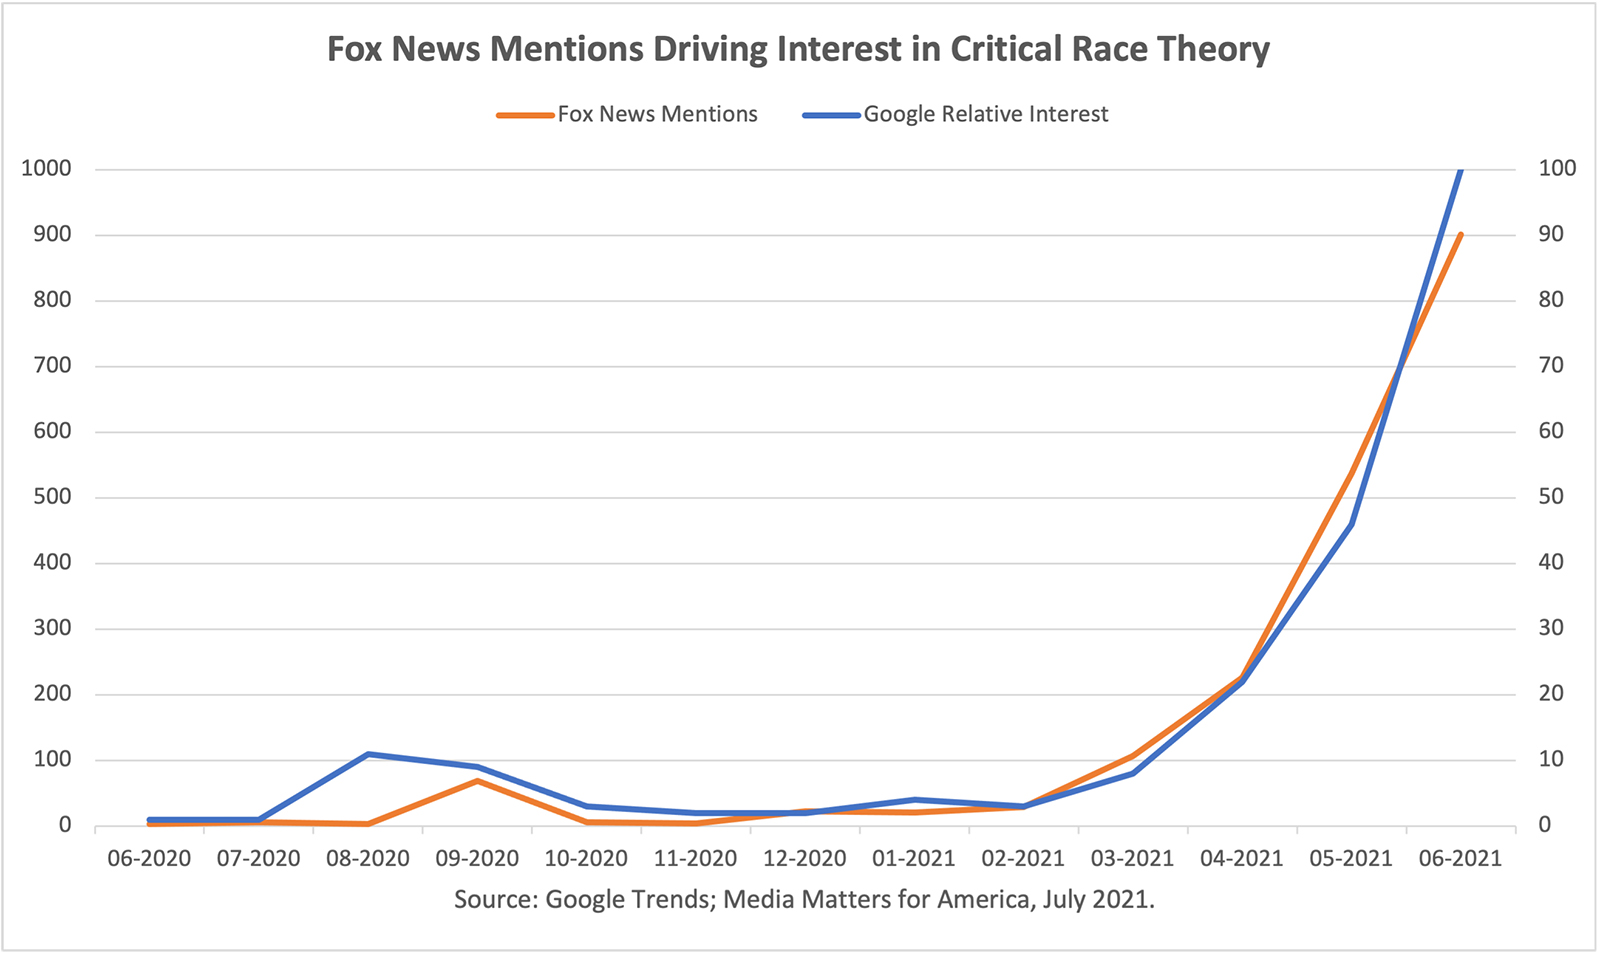 "Fox News Mentions Driving Interest in Critical Race Theory" Graphic courtesy of Robert P. Jones